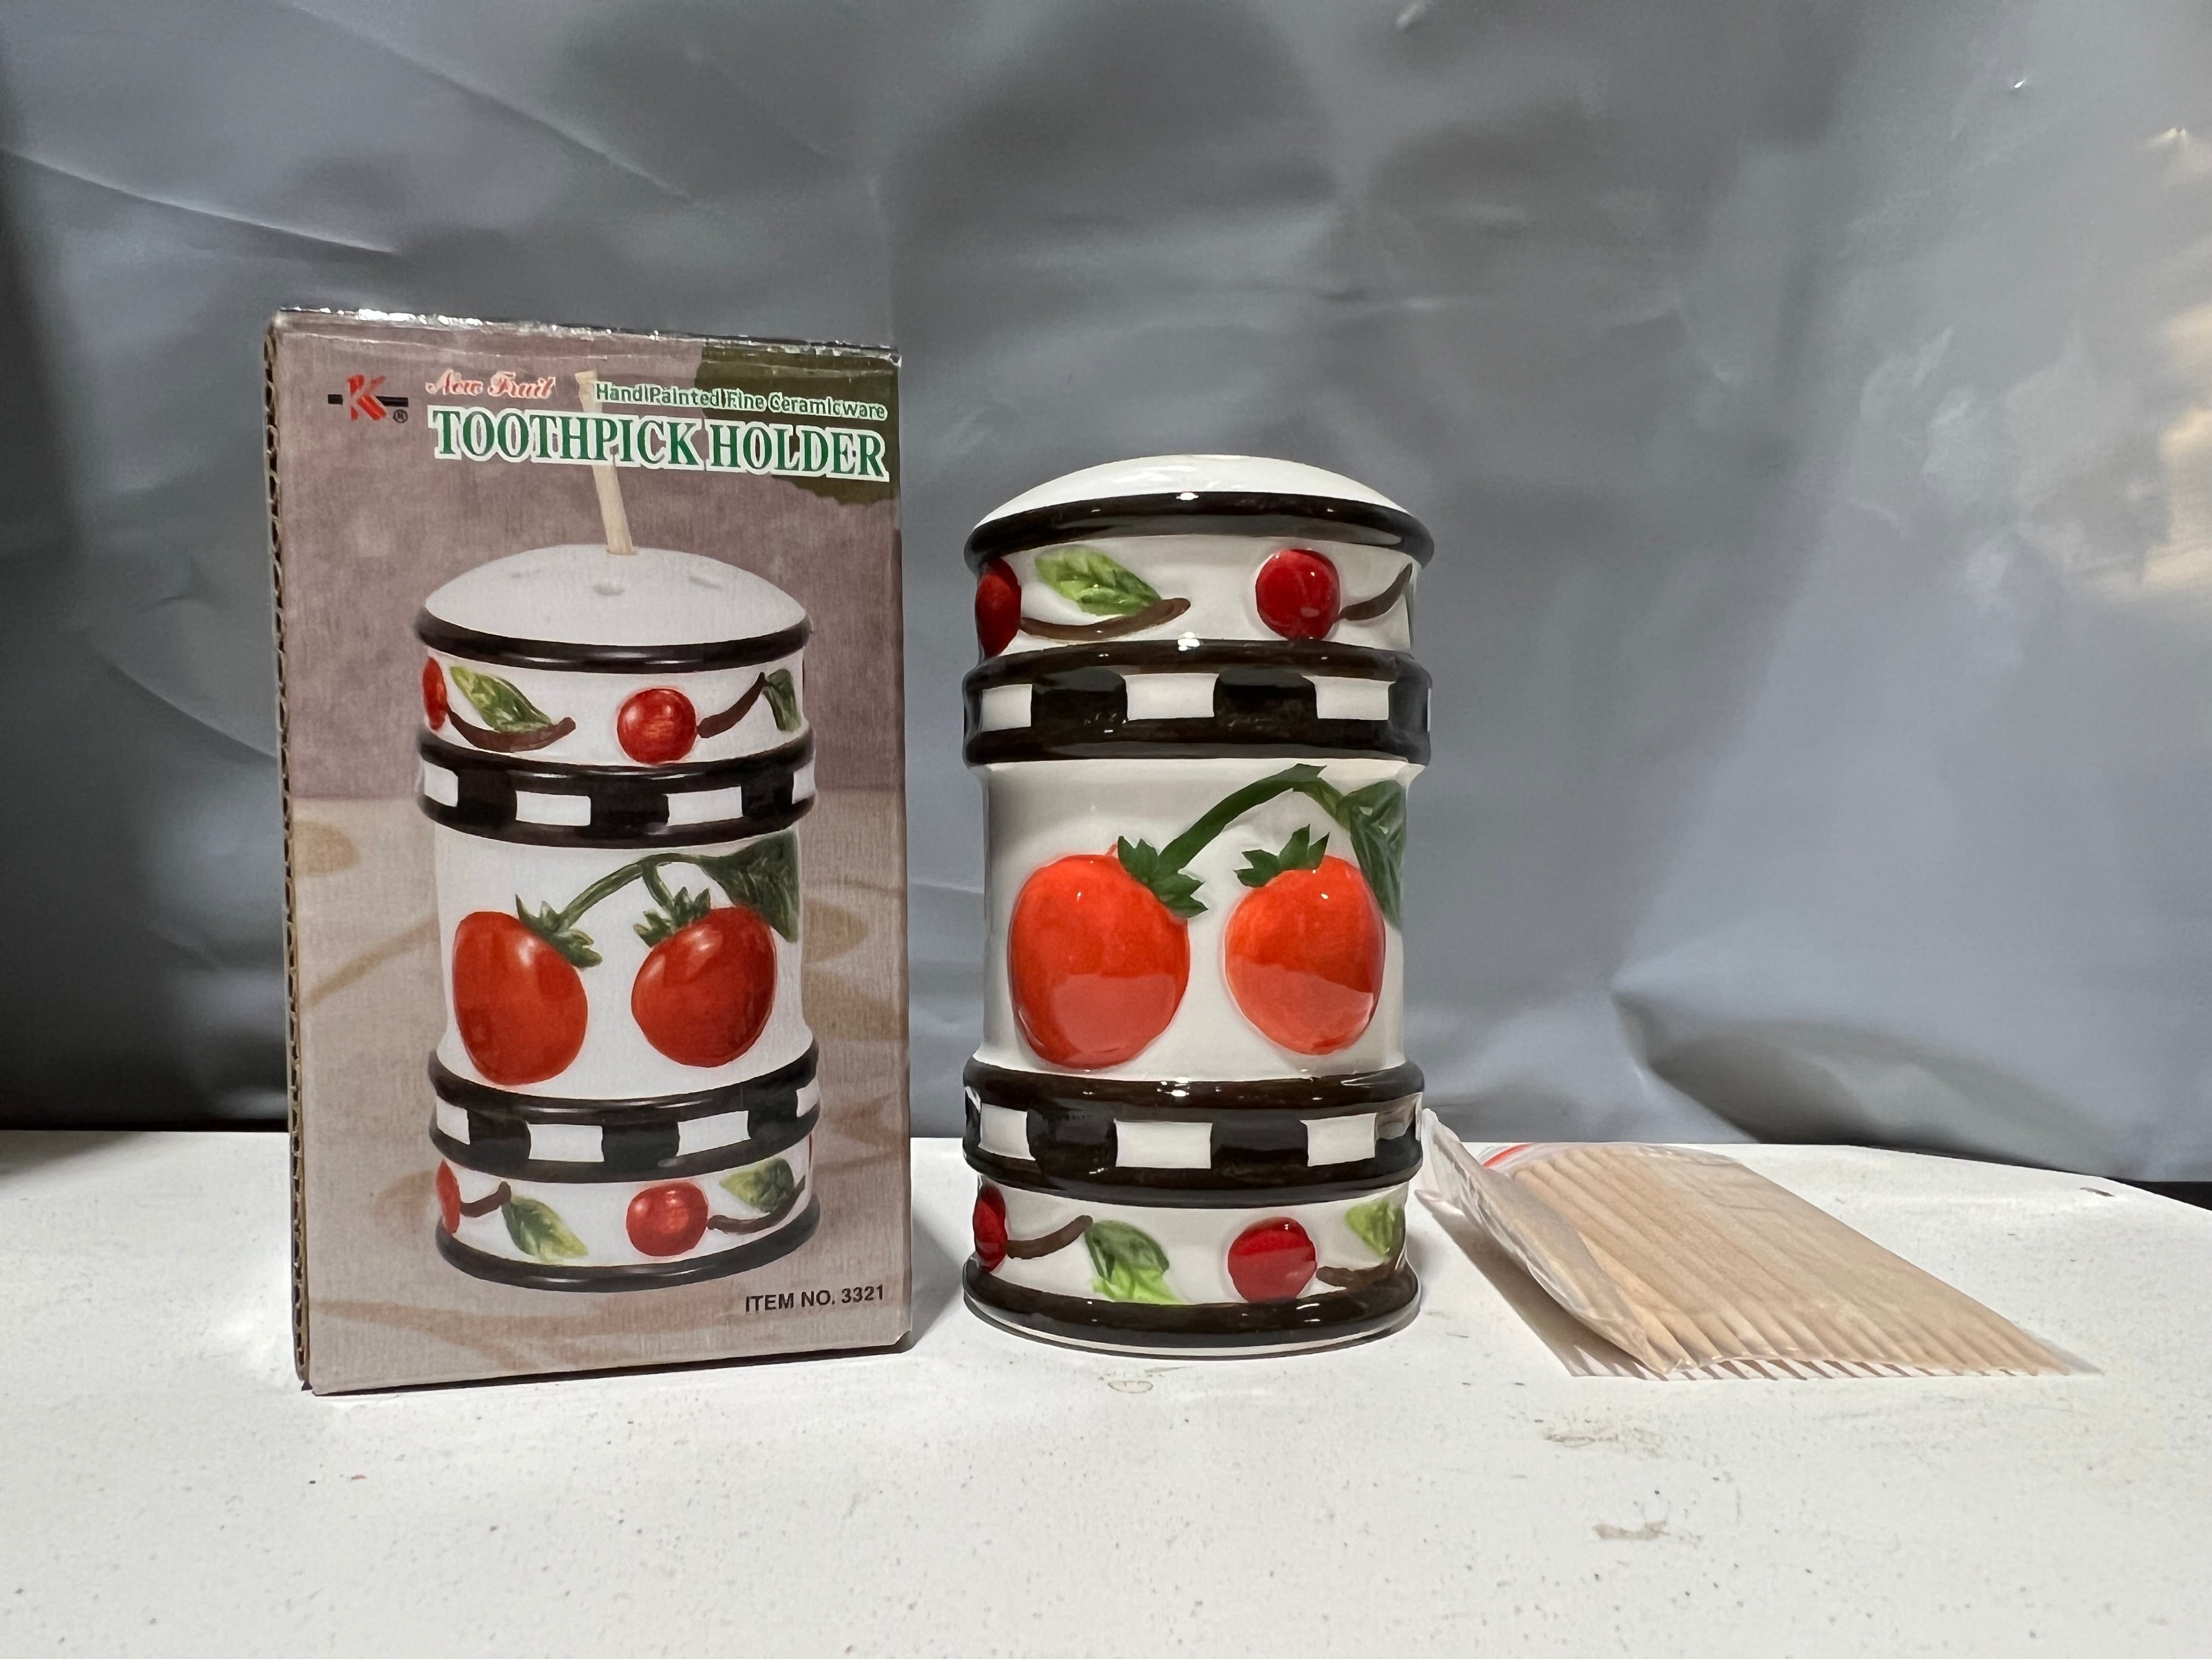 Fruit 3321 Hand Painted Fine Ceramicware Toothpick Holder With 20 Toothpicks